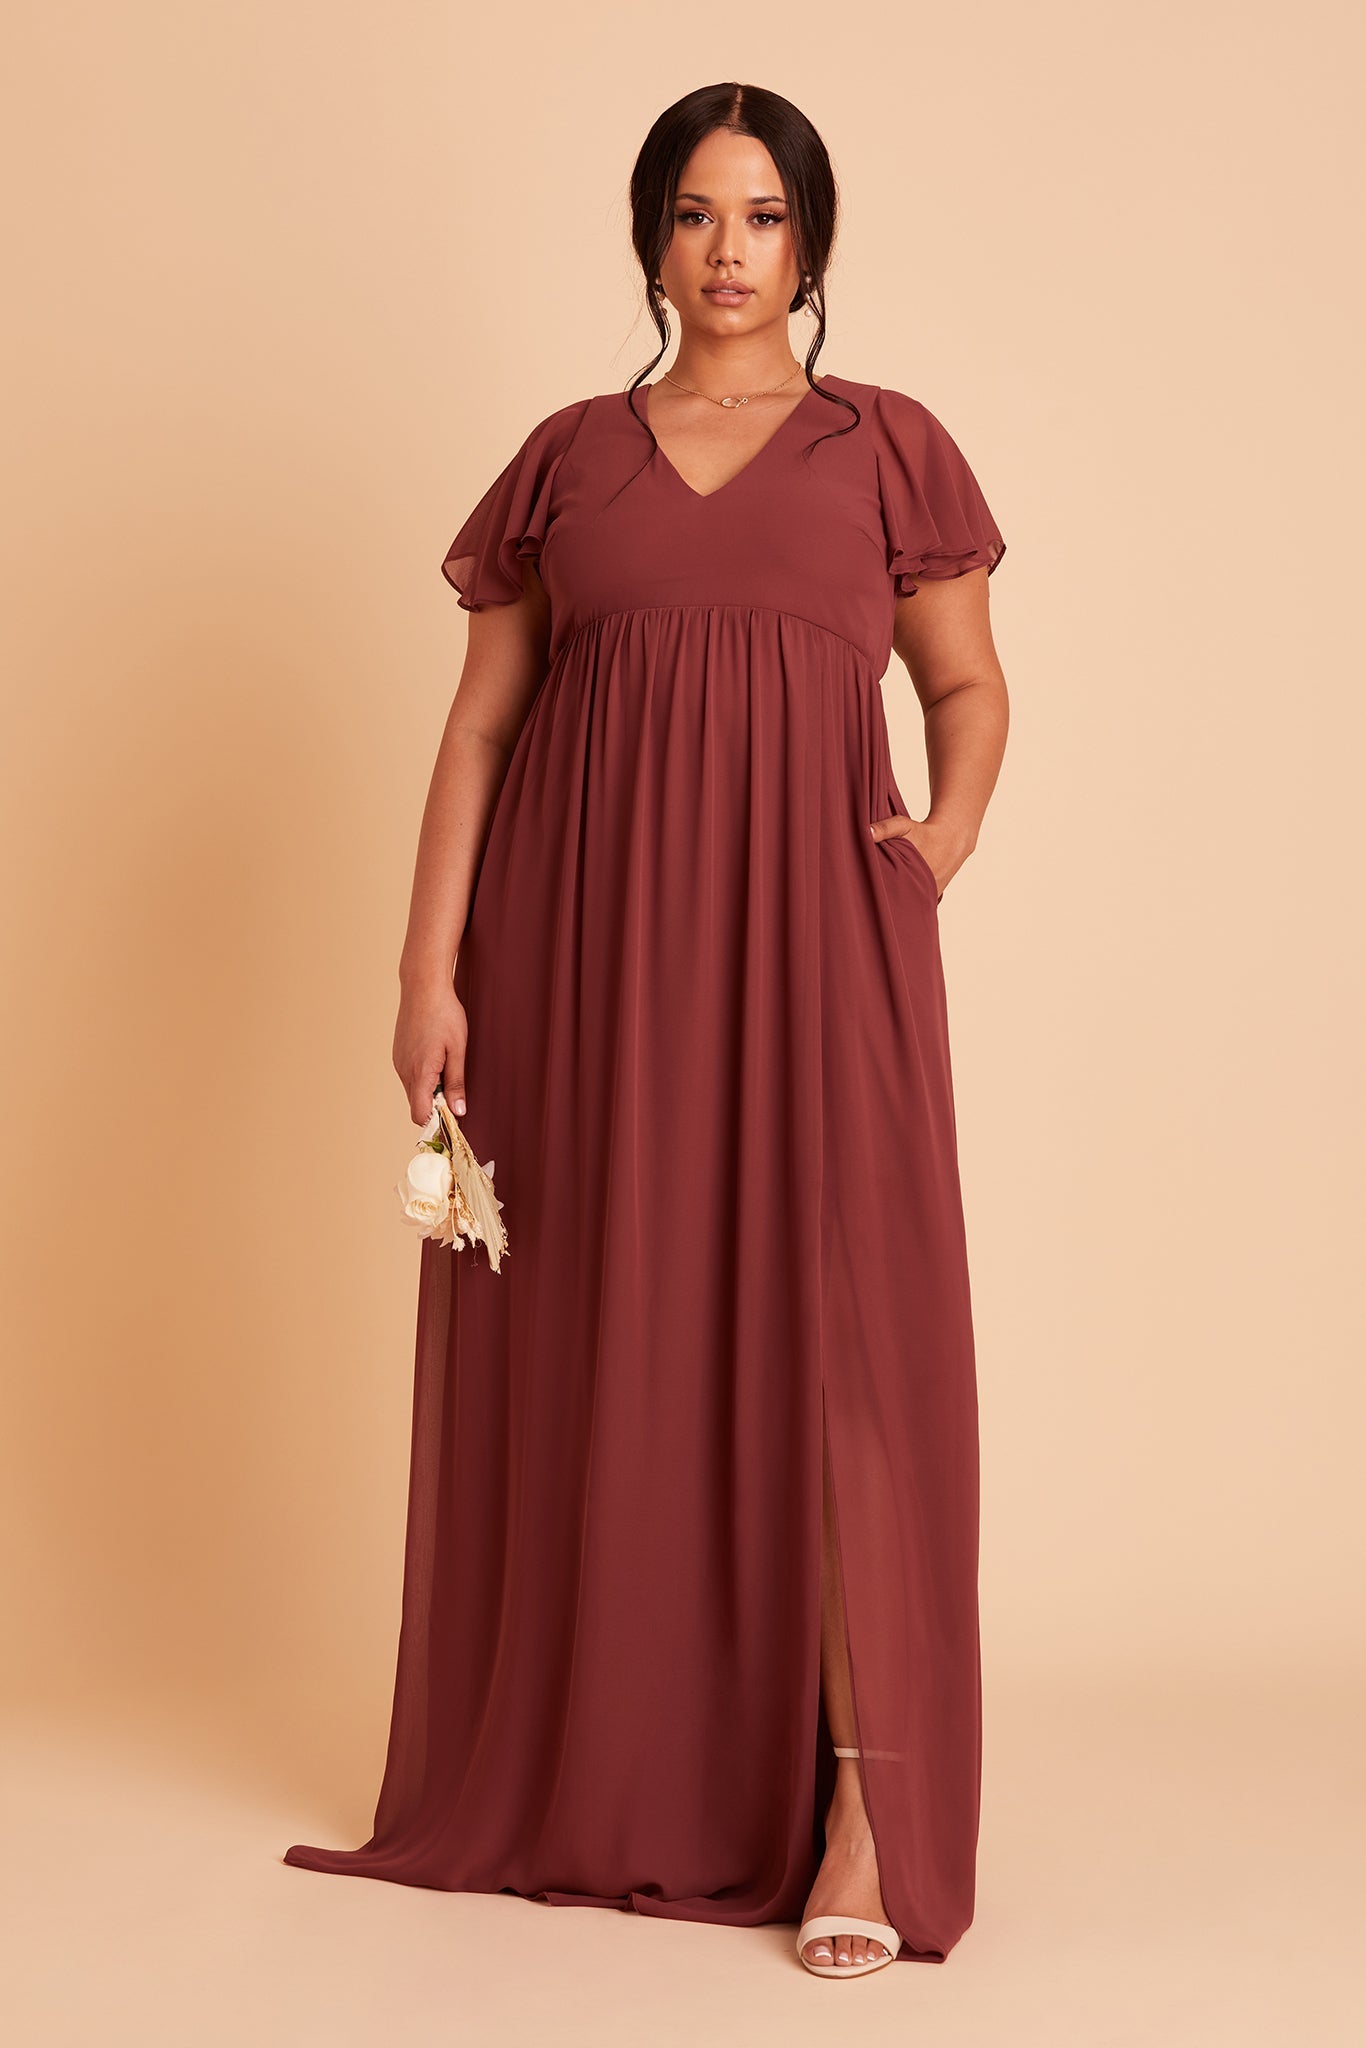 Hannah empire plus size bridesmaid dress in rosewood chiffon by Birdy Grey, front view